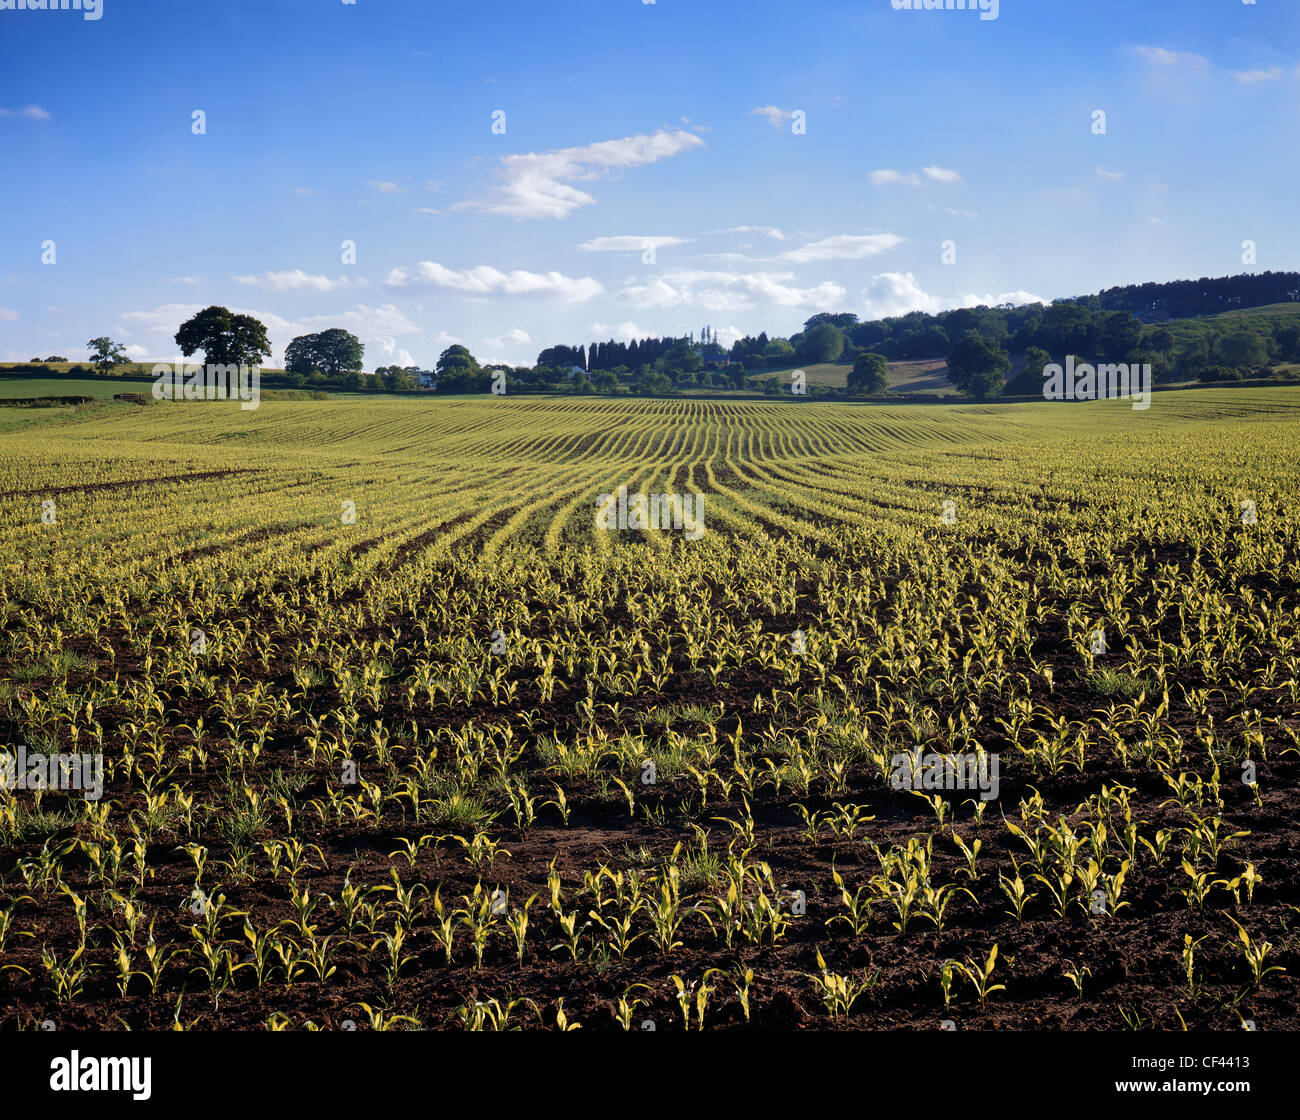 A view across a flourishing, fertile arable field in Cheshire during the early part of the growing season. Stock Photo